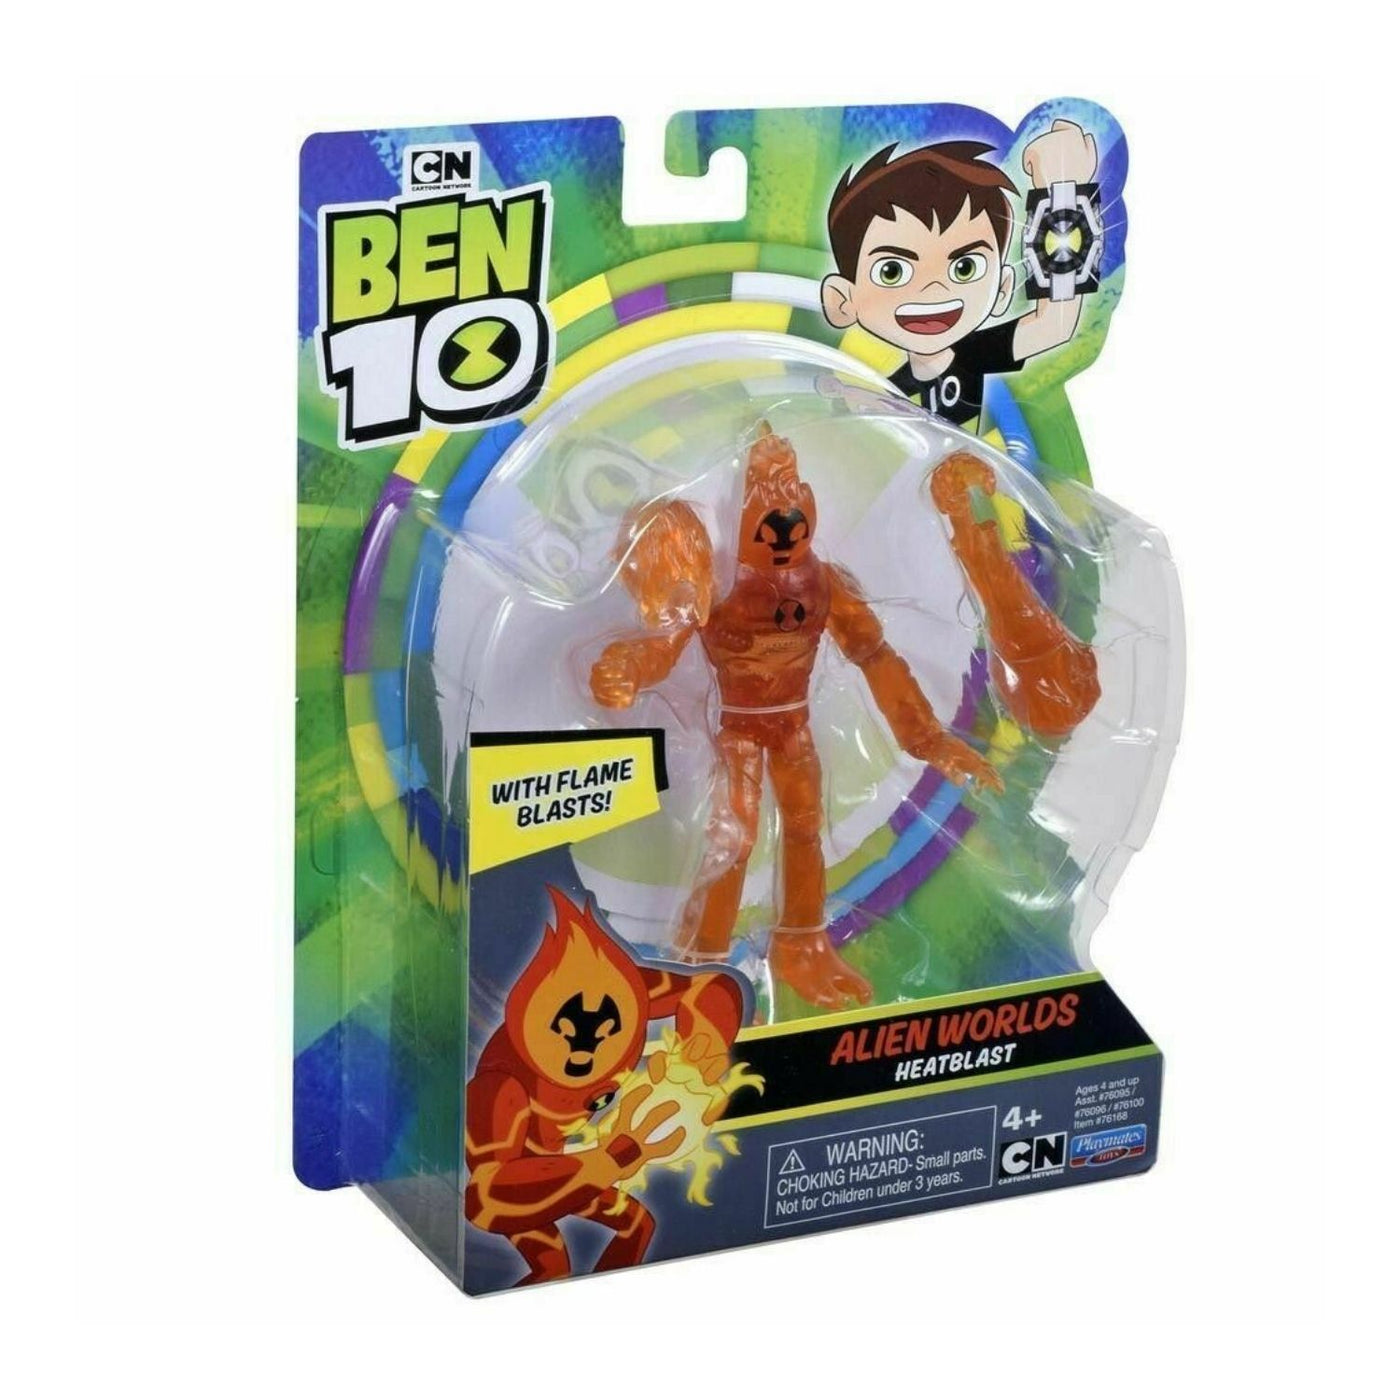 If you got to pick any ten aliens and any omnitrix which ones will you pick  and no alien x or any others from his rece : r/Ben10